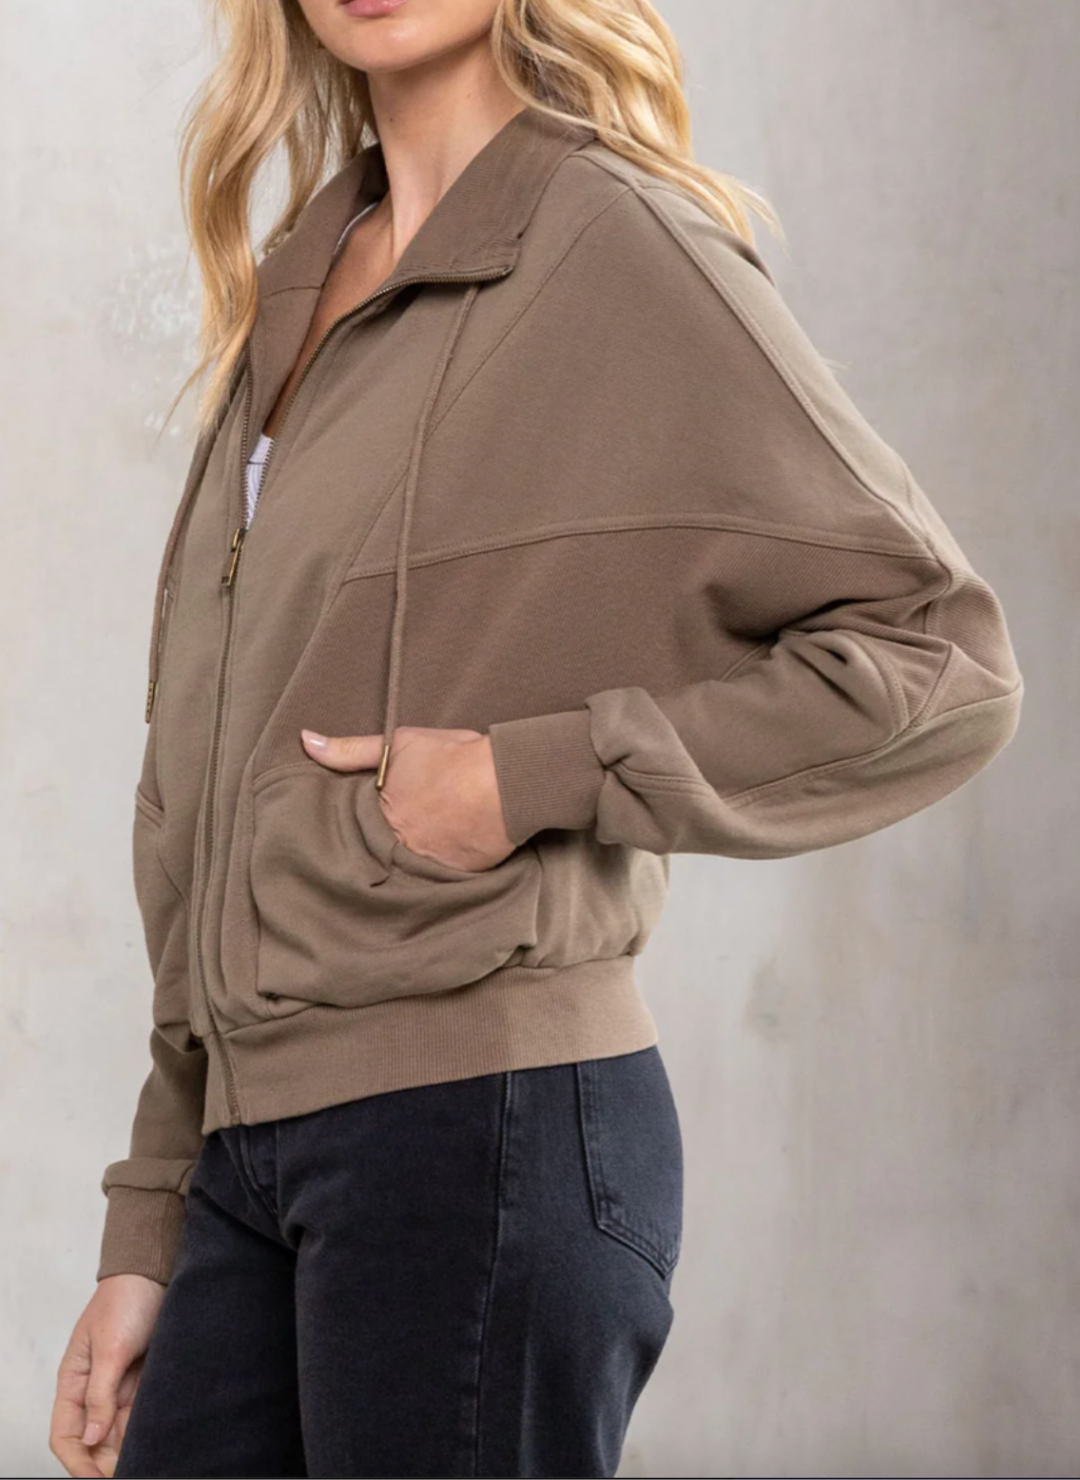 Side/ Front view of the model wearing the LS VIvian Vintage Zip Up Sweatshirt. Showing that it is a zip closure . The model is showing that the sweatshirt has pockets.